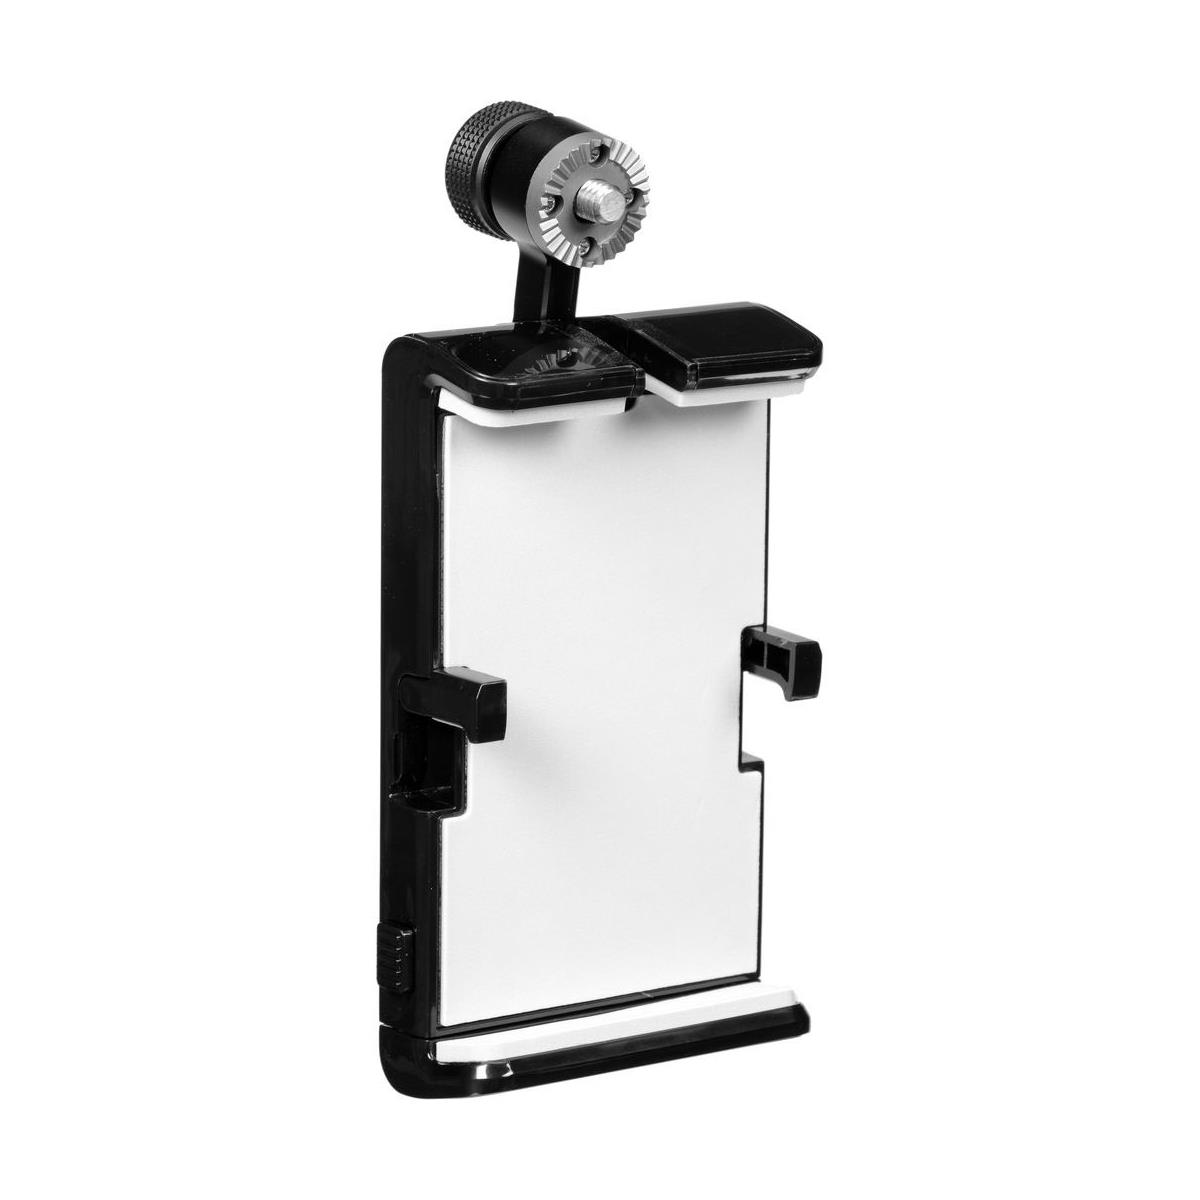 DJI Part 27 Ronin-M Mobile Device Holder for Up to 6.7" Width Smartphone -  CP.ZM.000218